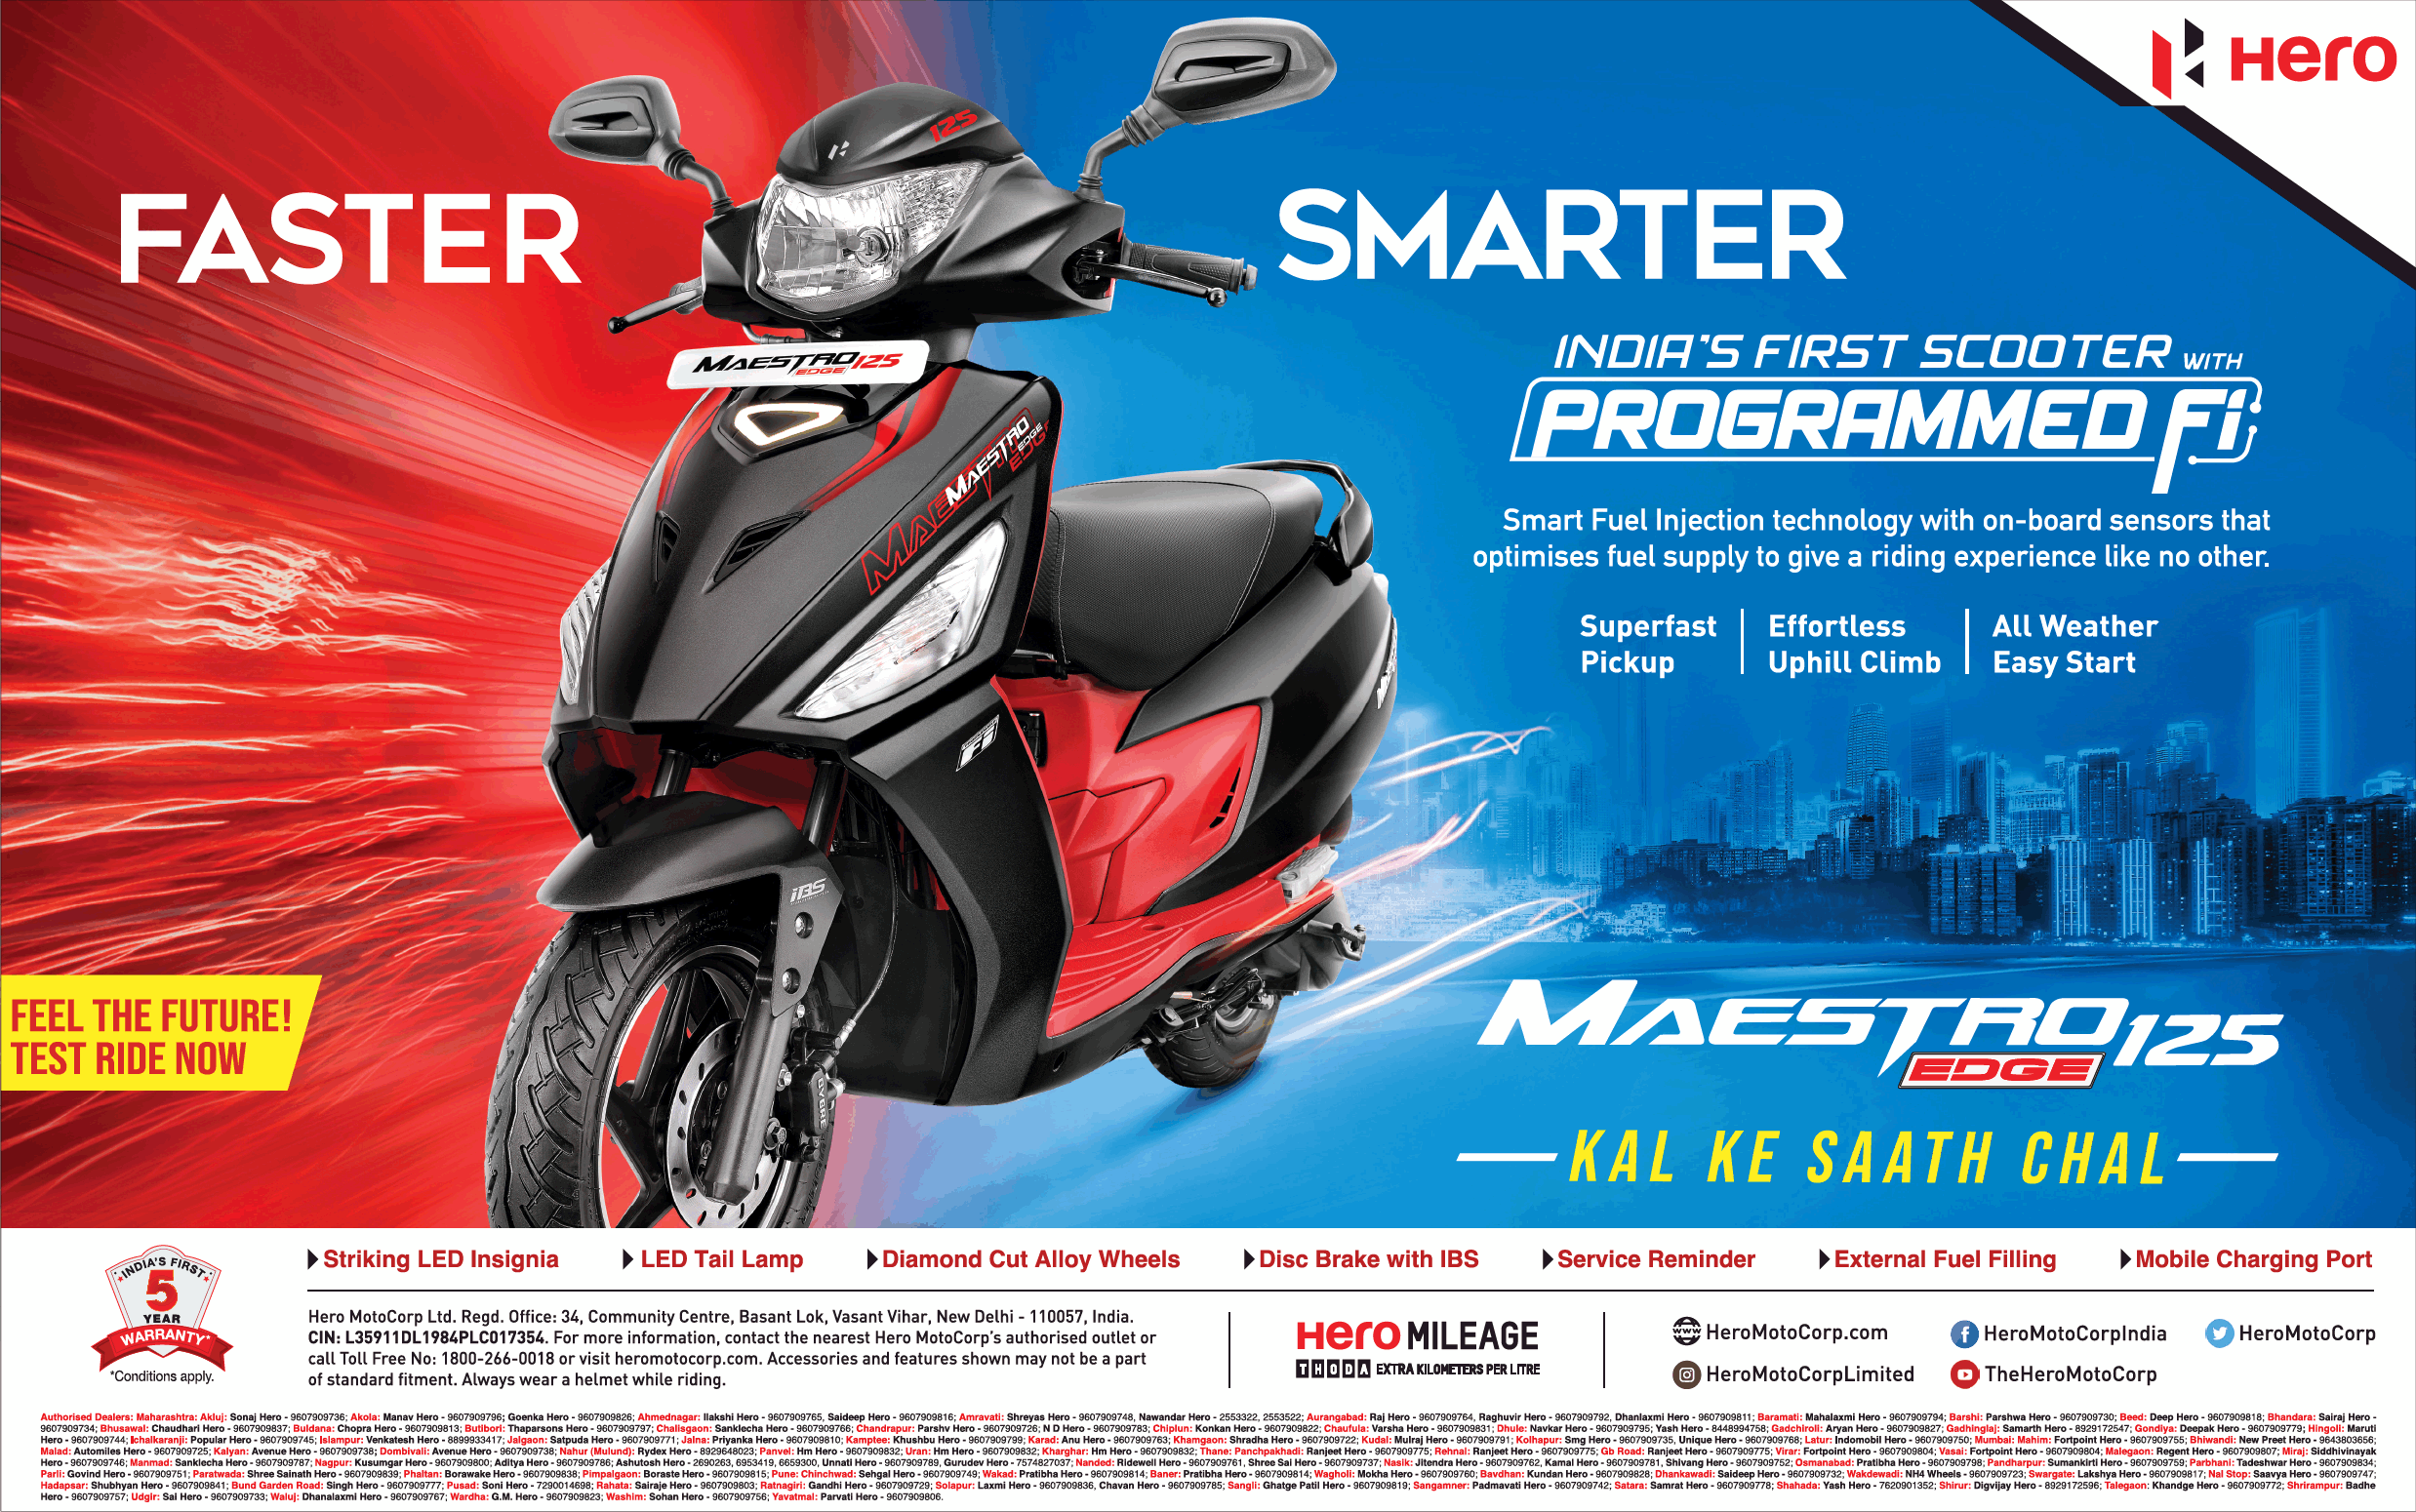 Full page advertisement in Times of India Mumbai for Hero